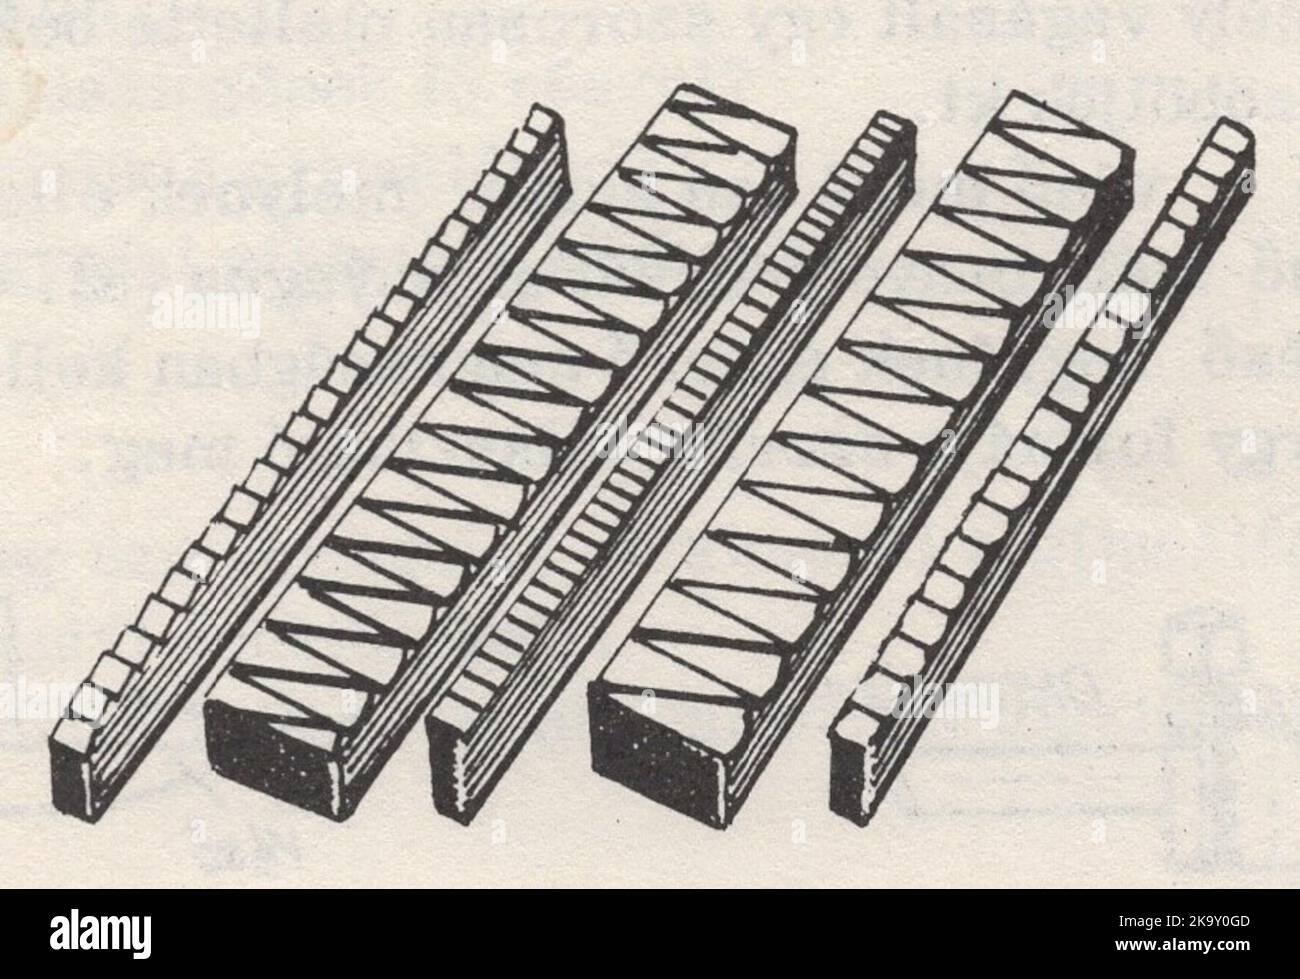 an illustrated collection of engraving techniques, methods and tools from an unknown book engraver tools and technics : casting templates / jigging templates Stock Photo